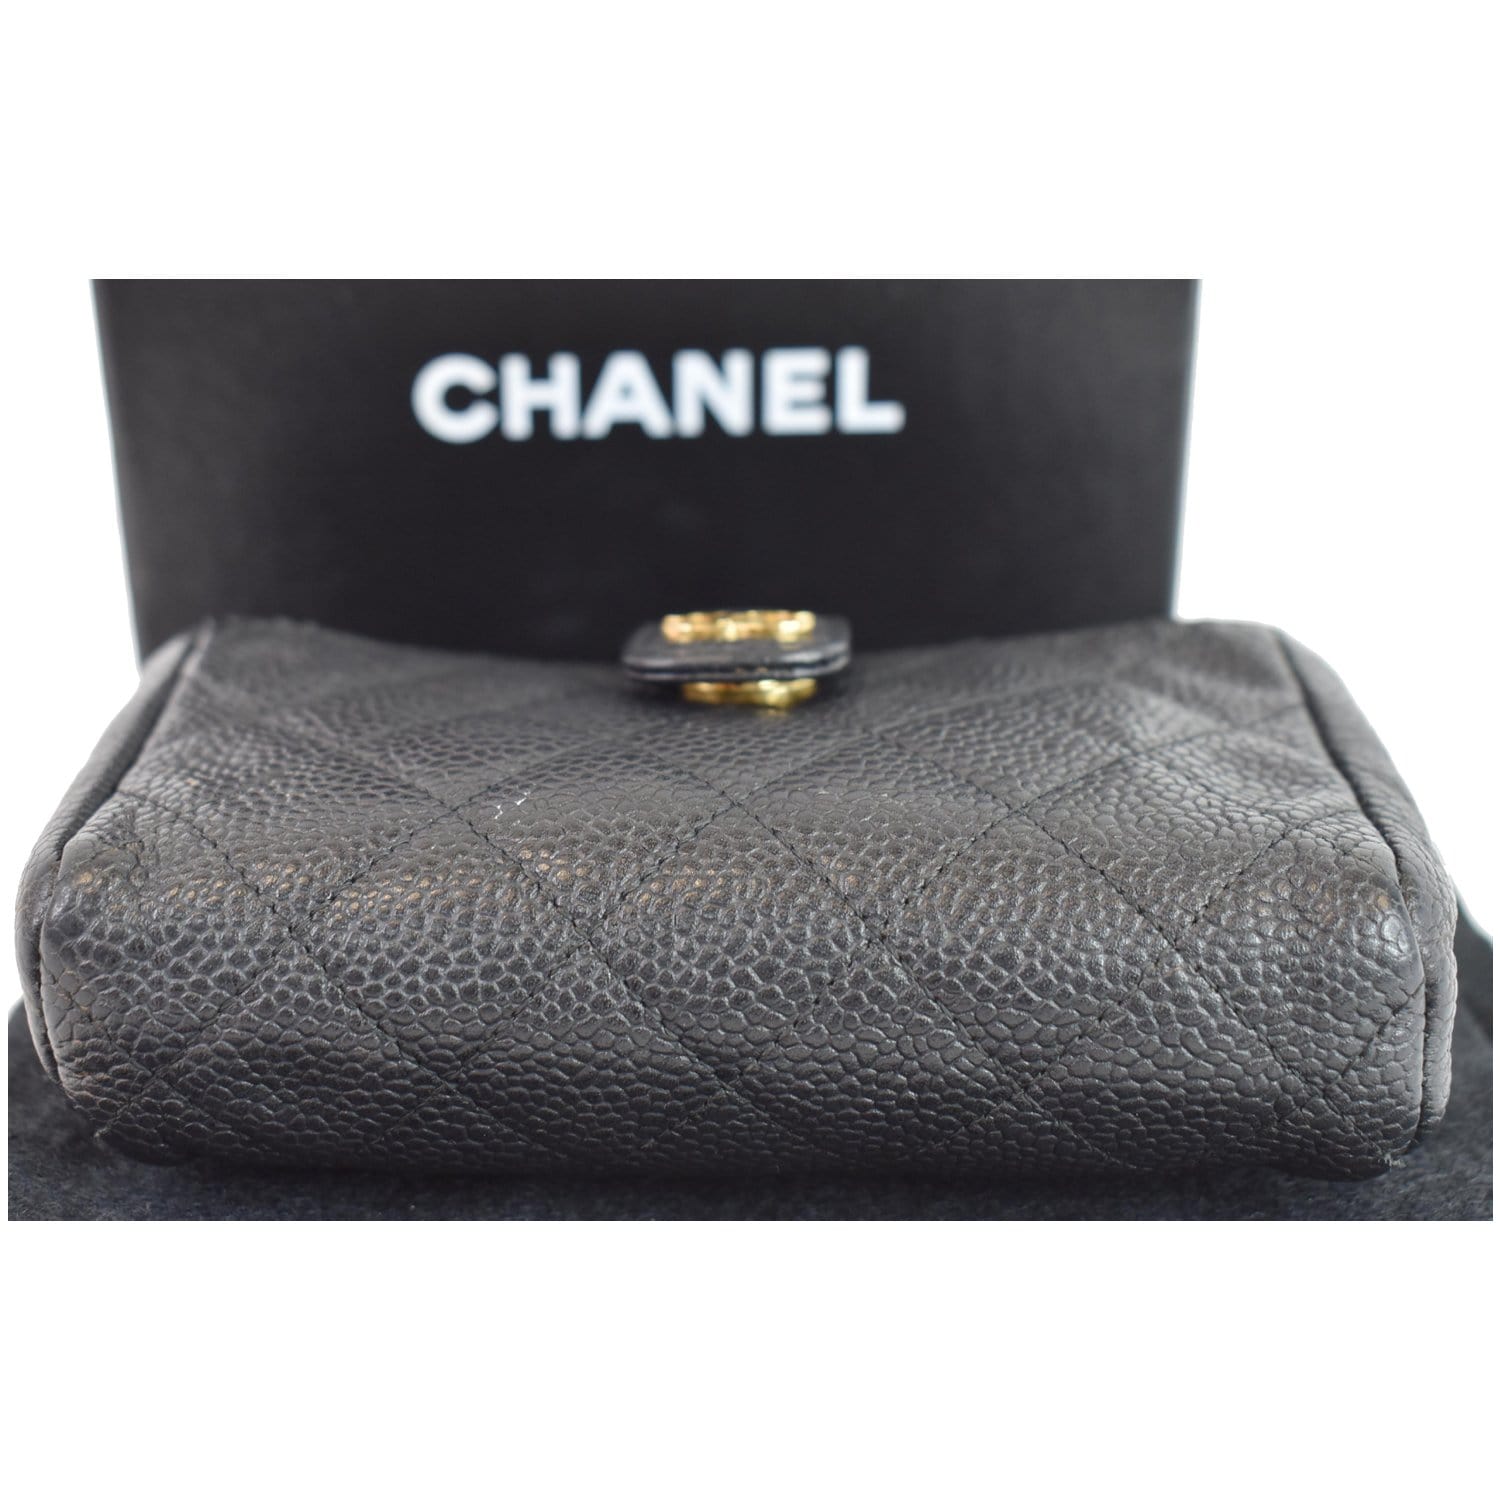 Chanel Quilted CC Phone Holder Crossbody Black Leather Mini Bag